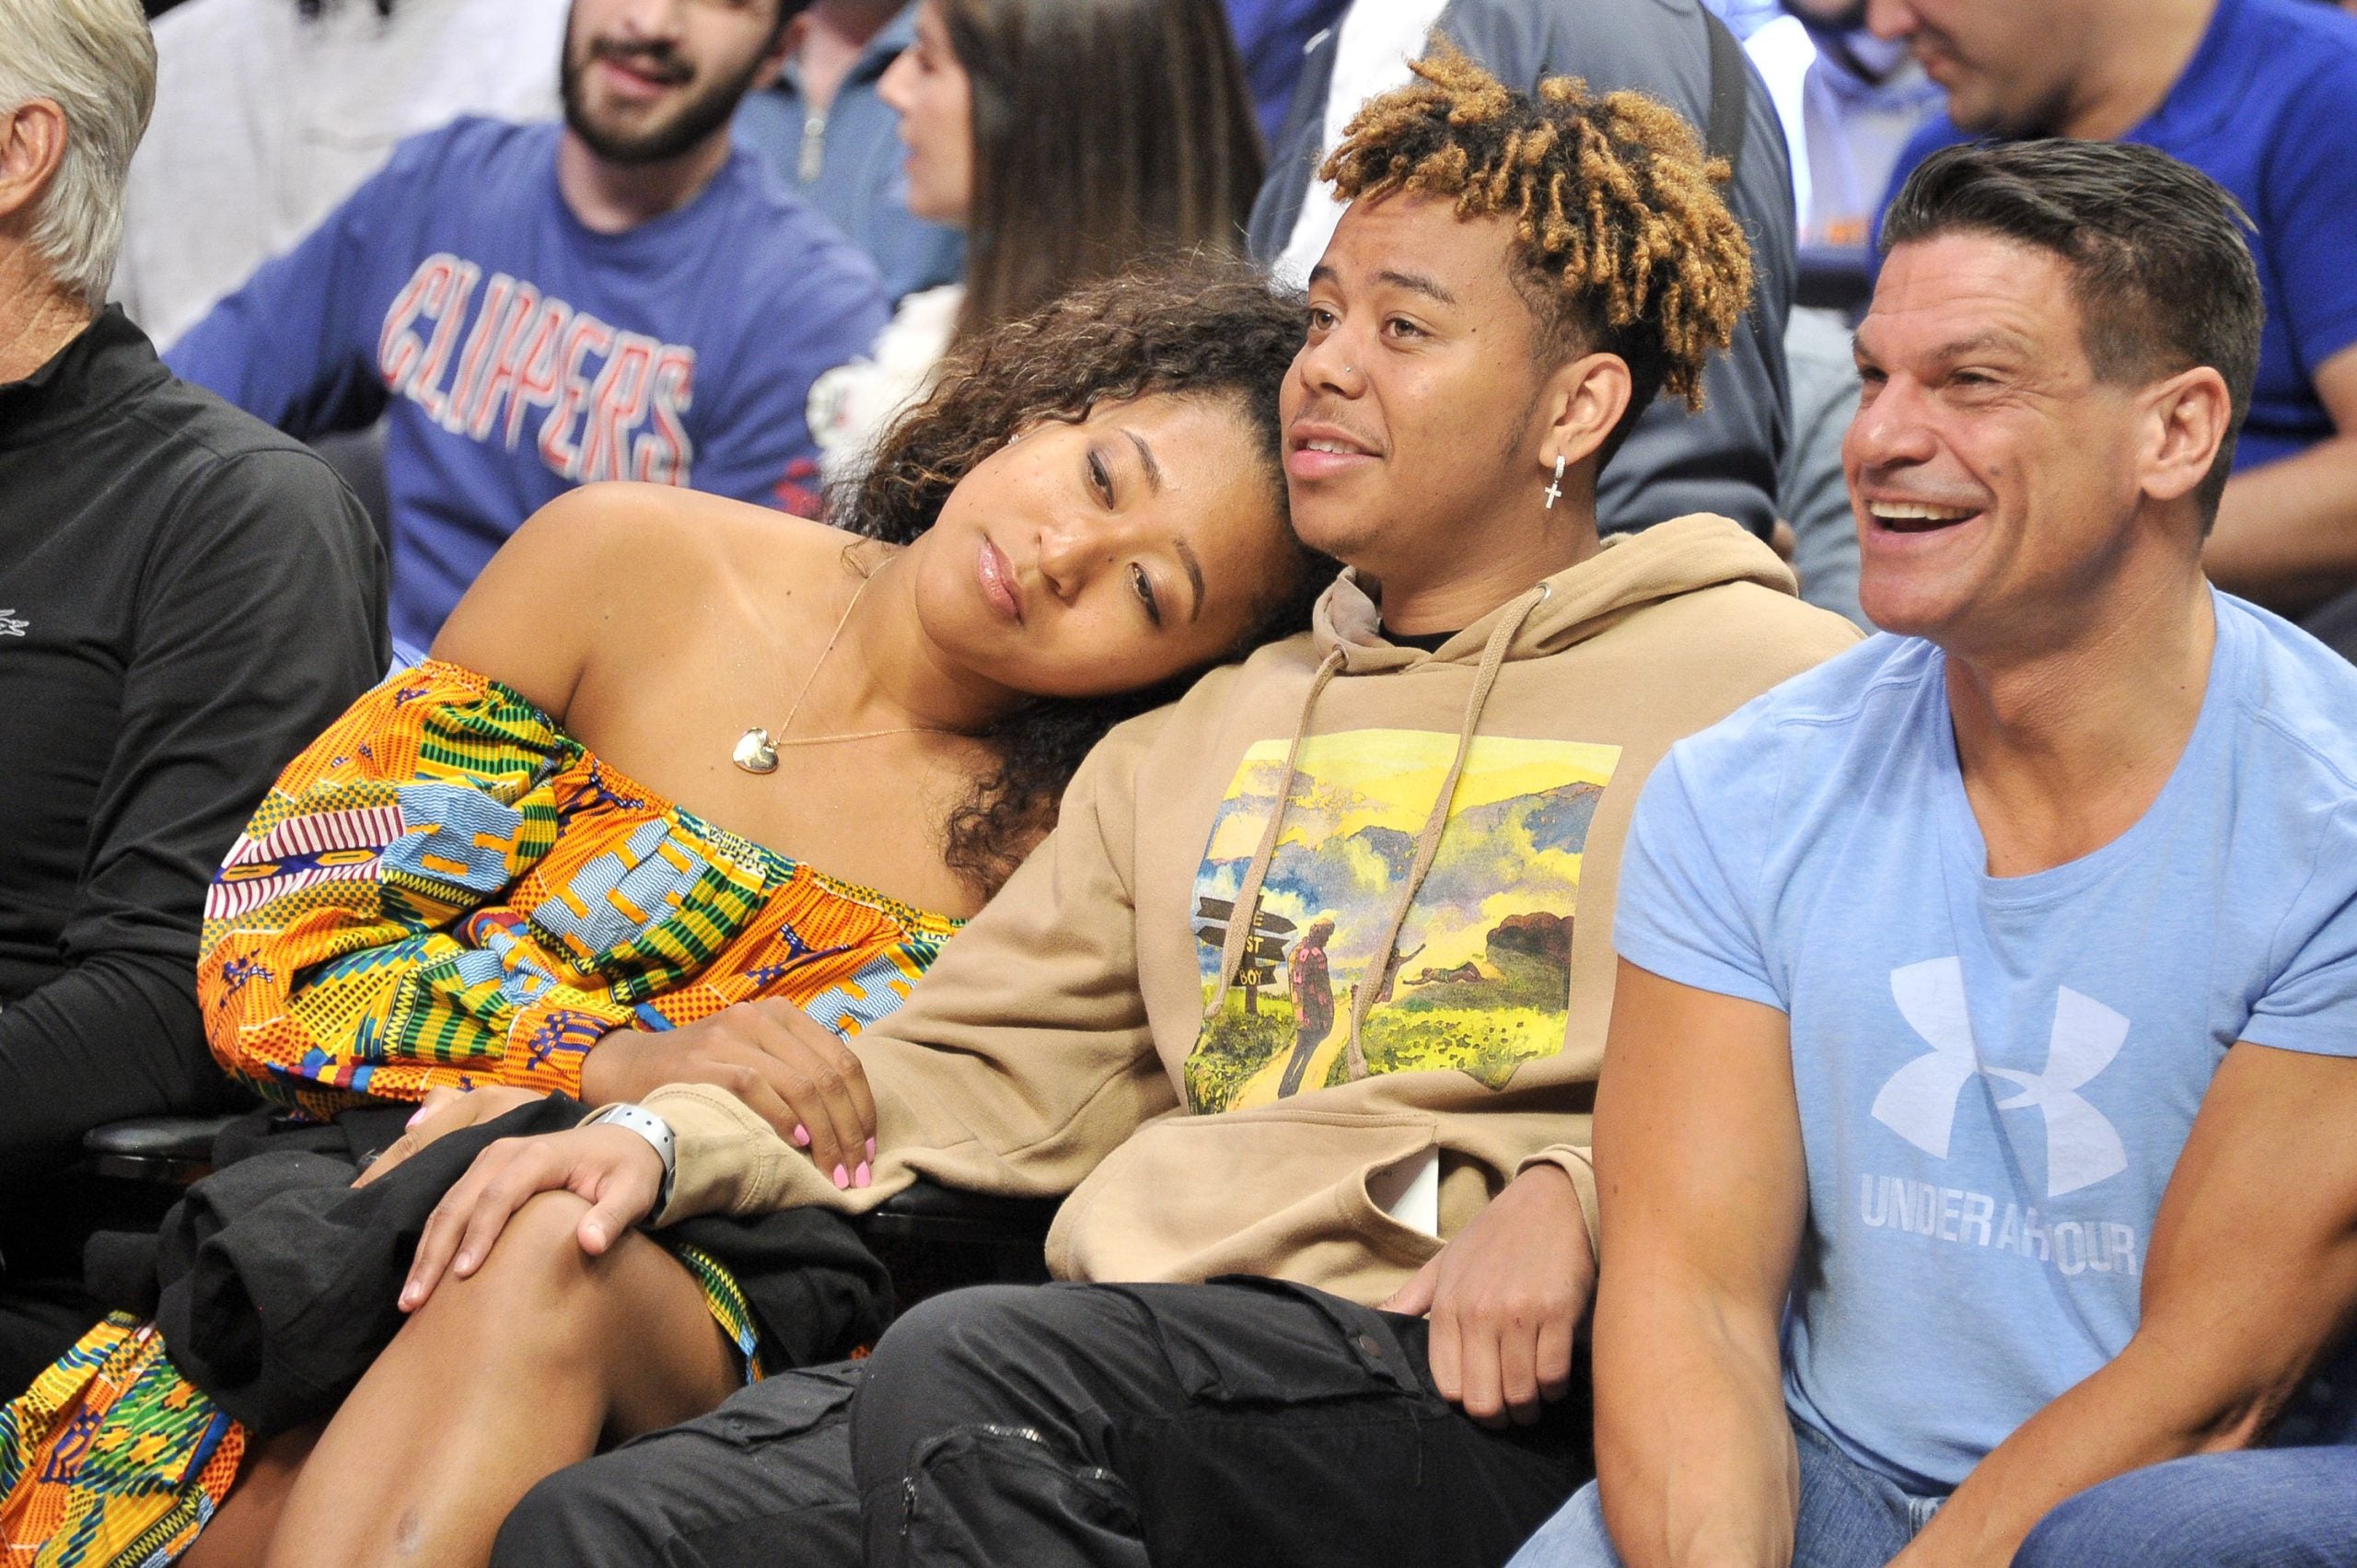 Naomi Osaka gives birth to first baby with boyfriend Cordae